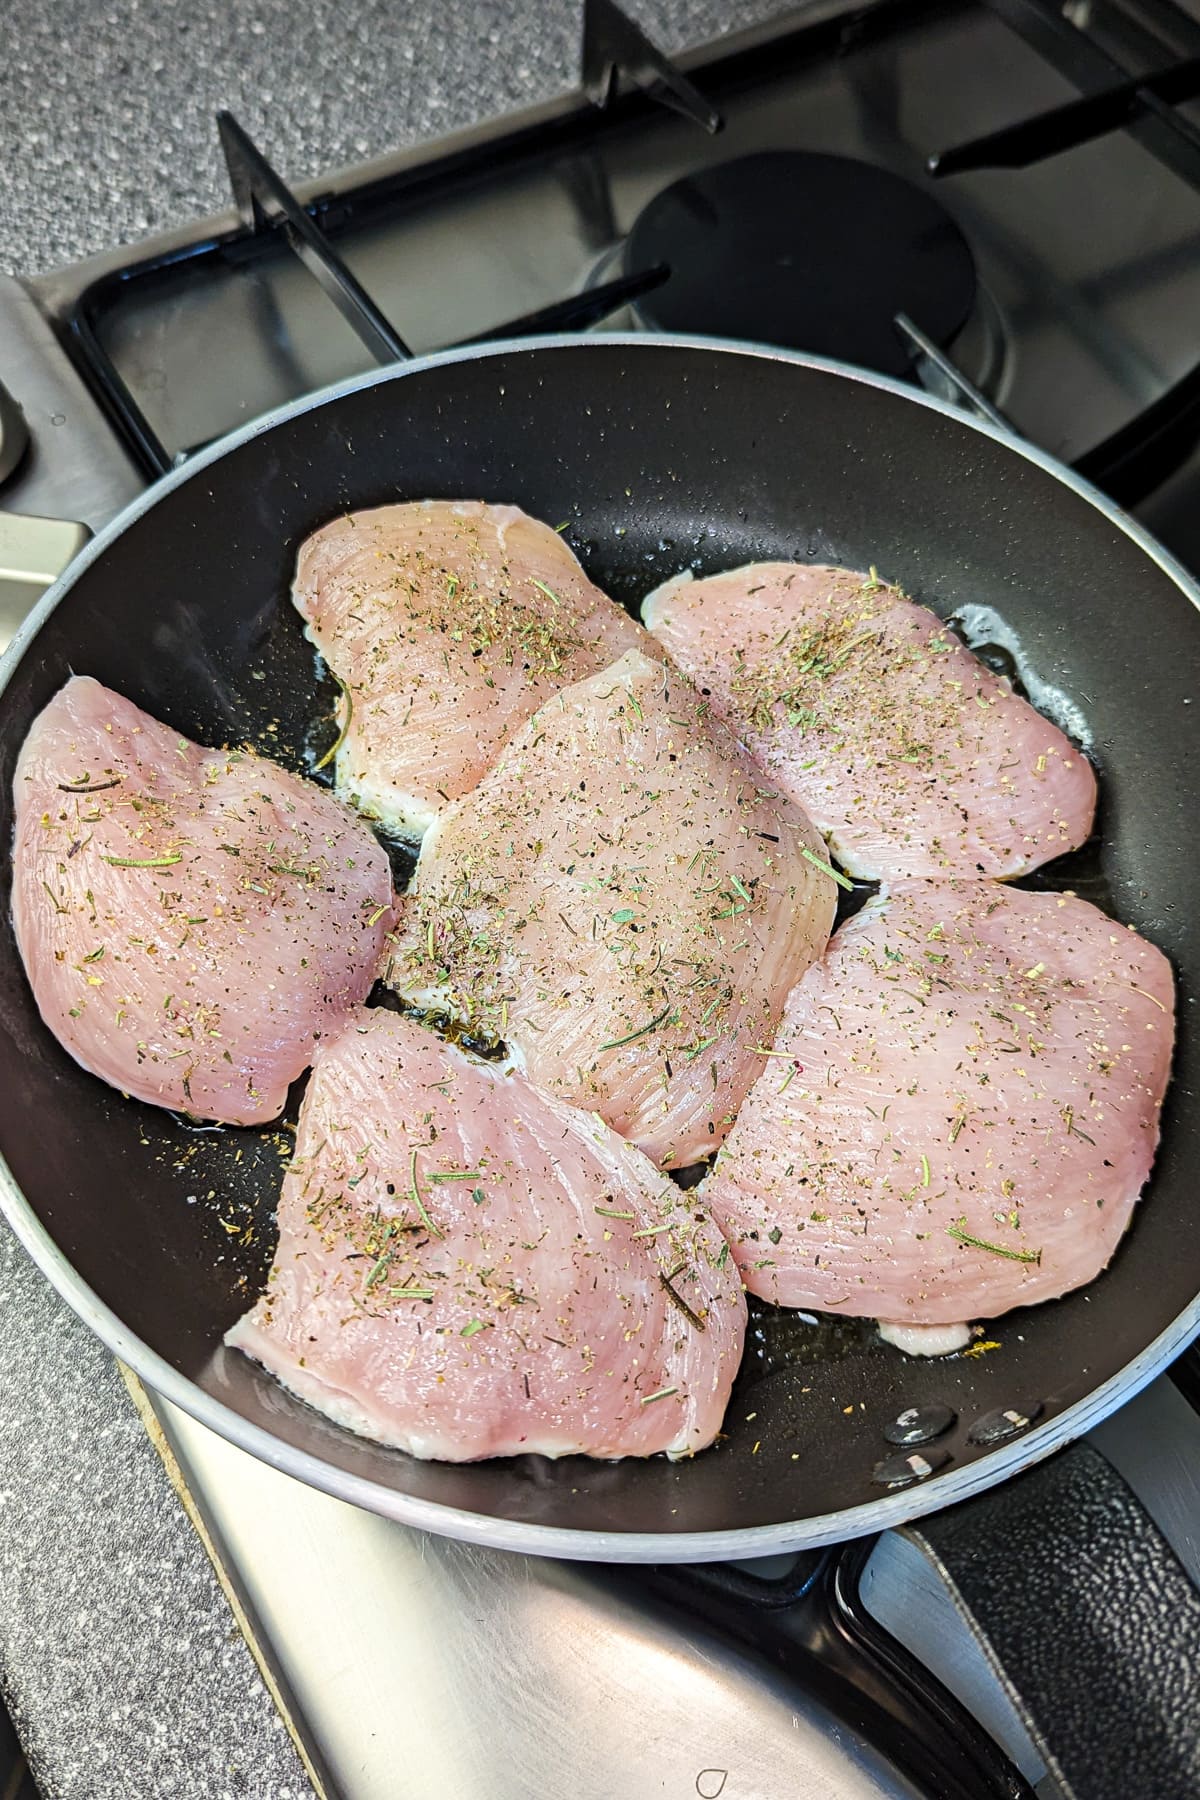 Raw chicken breasts seasoned with herbs frying in a skillet on a stove.